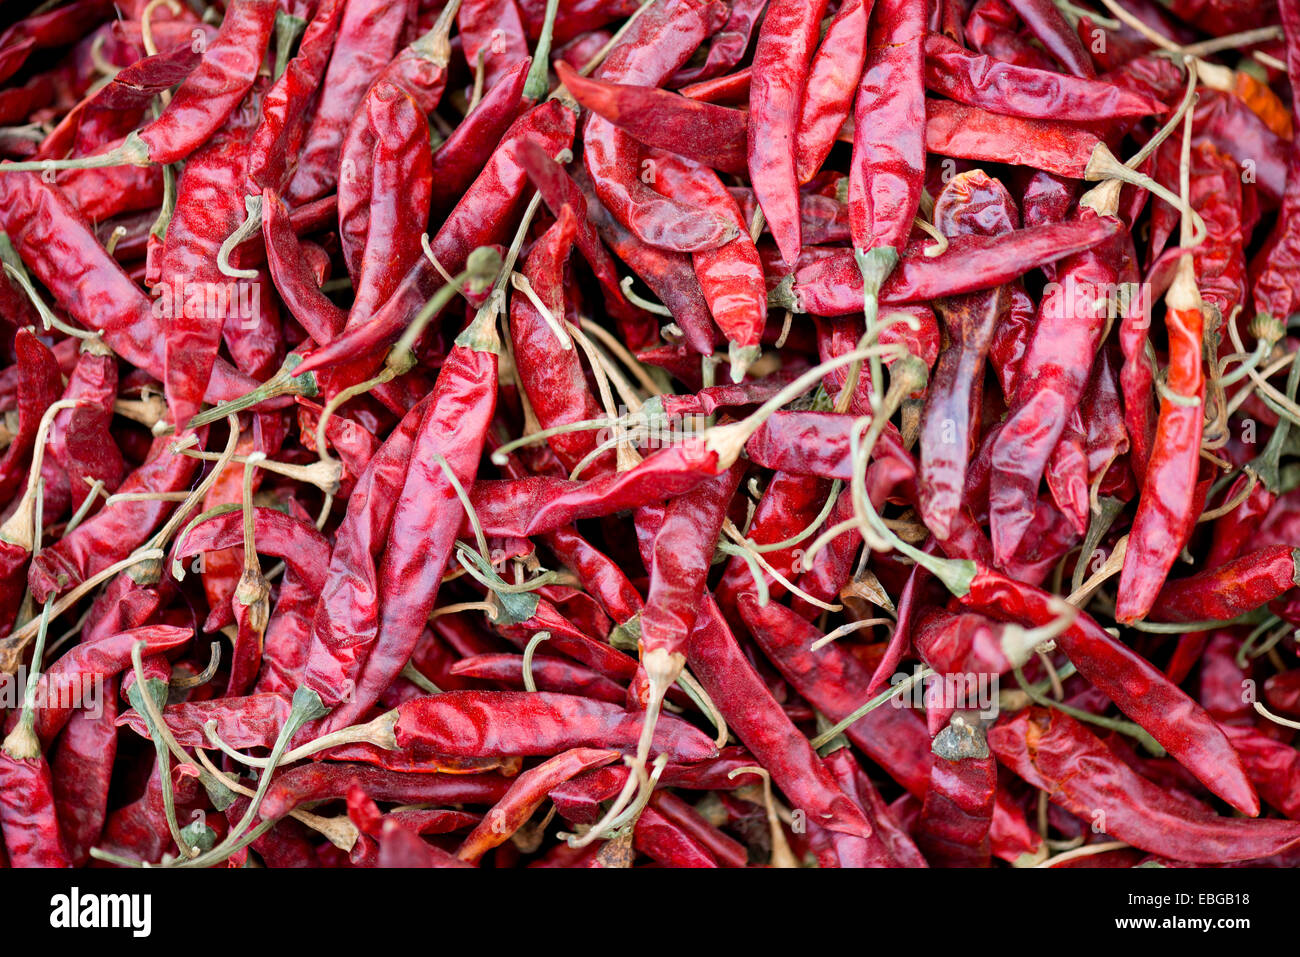 Red chillies, Bassi, Rajasthan, India Stock Photo